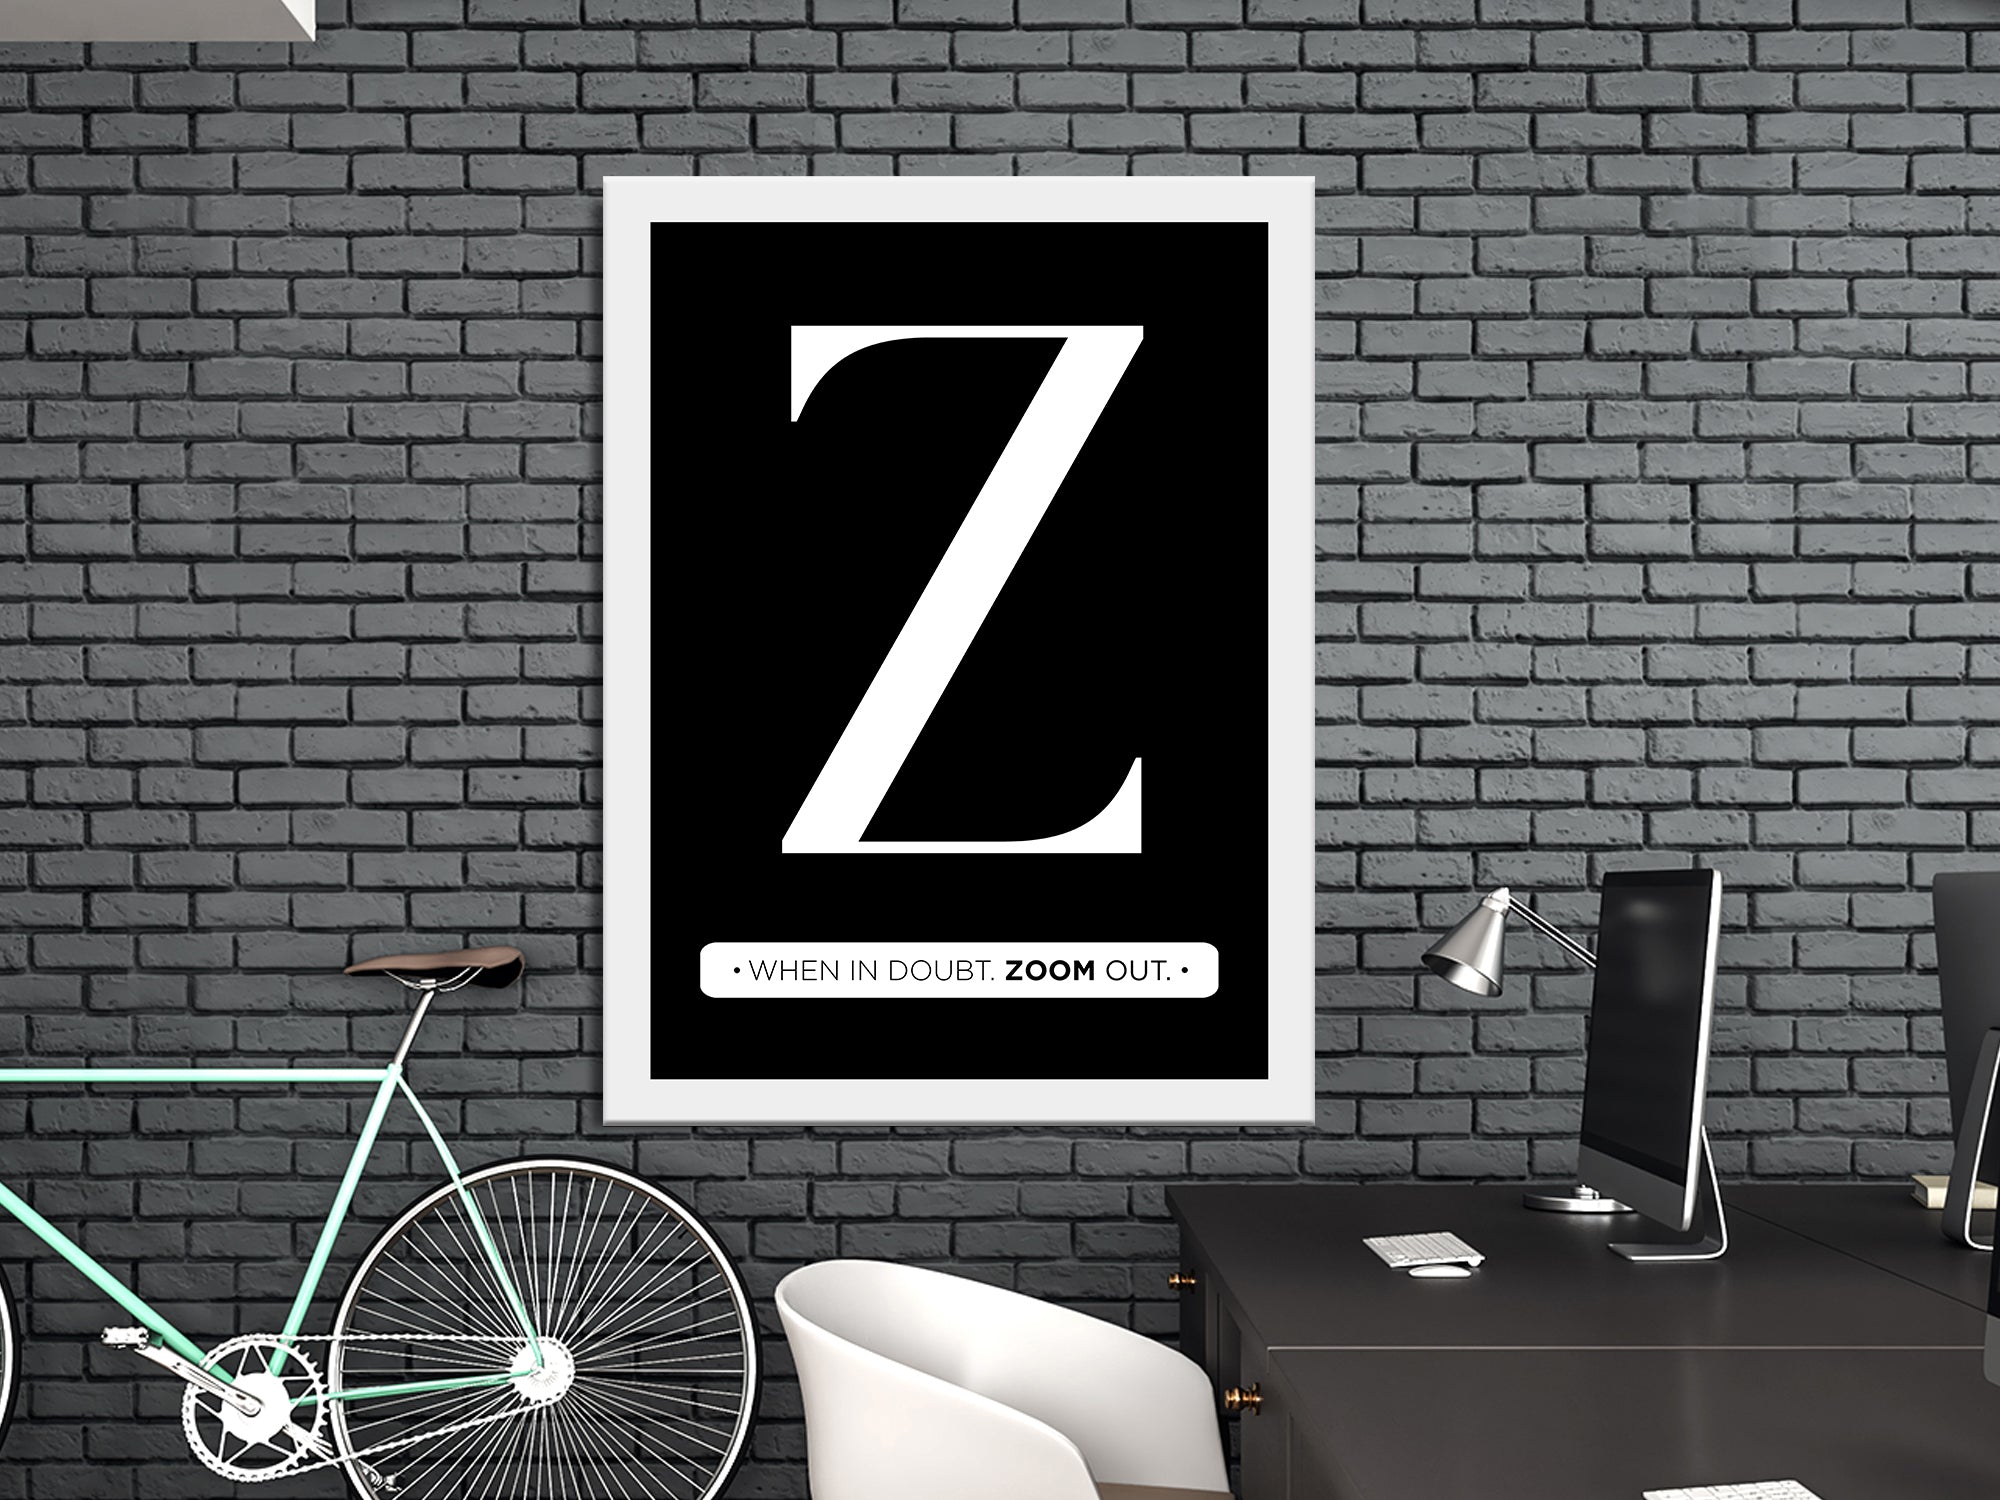 When In Doubt Zoom Out - Living Room - Canvas Wall Art